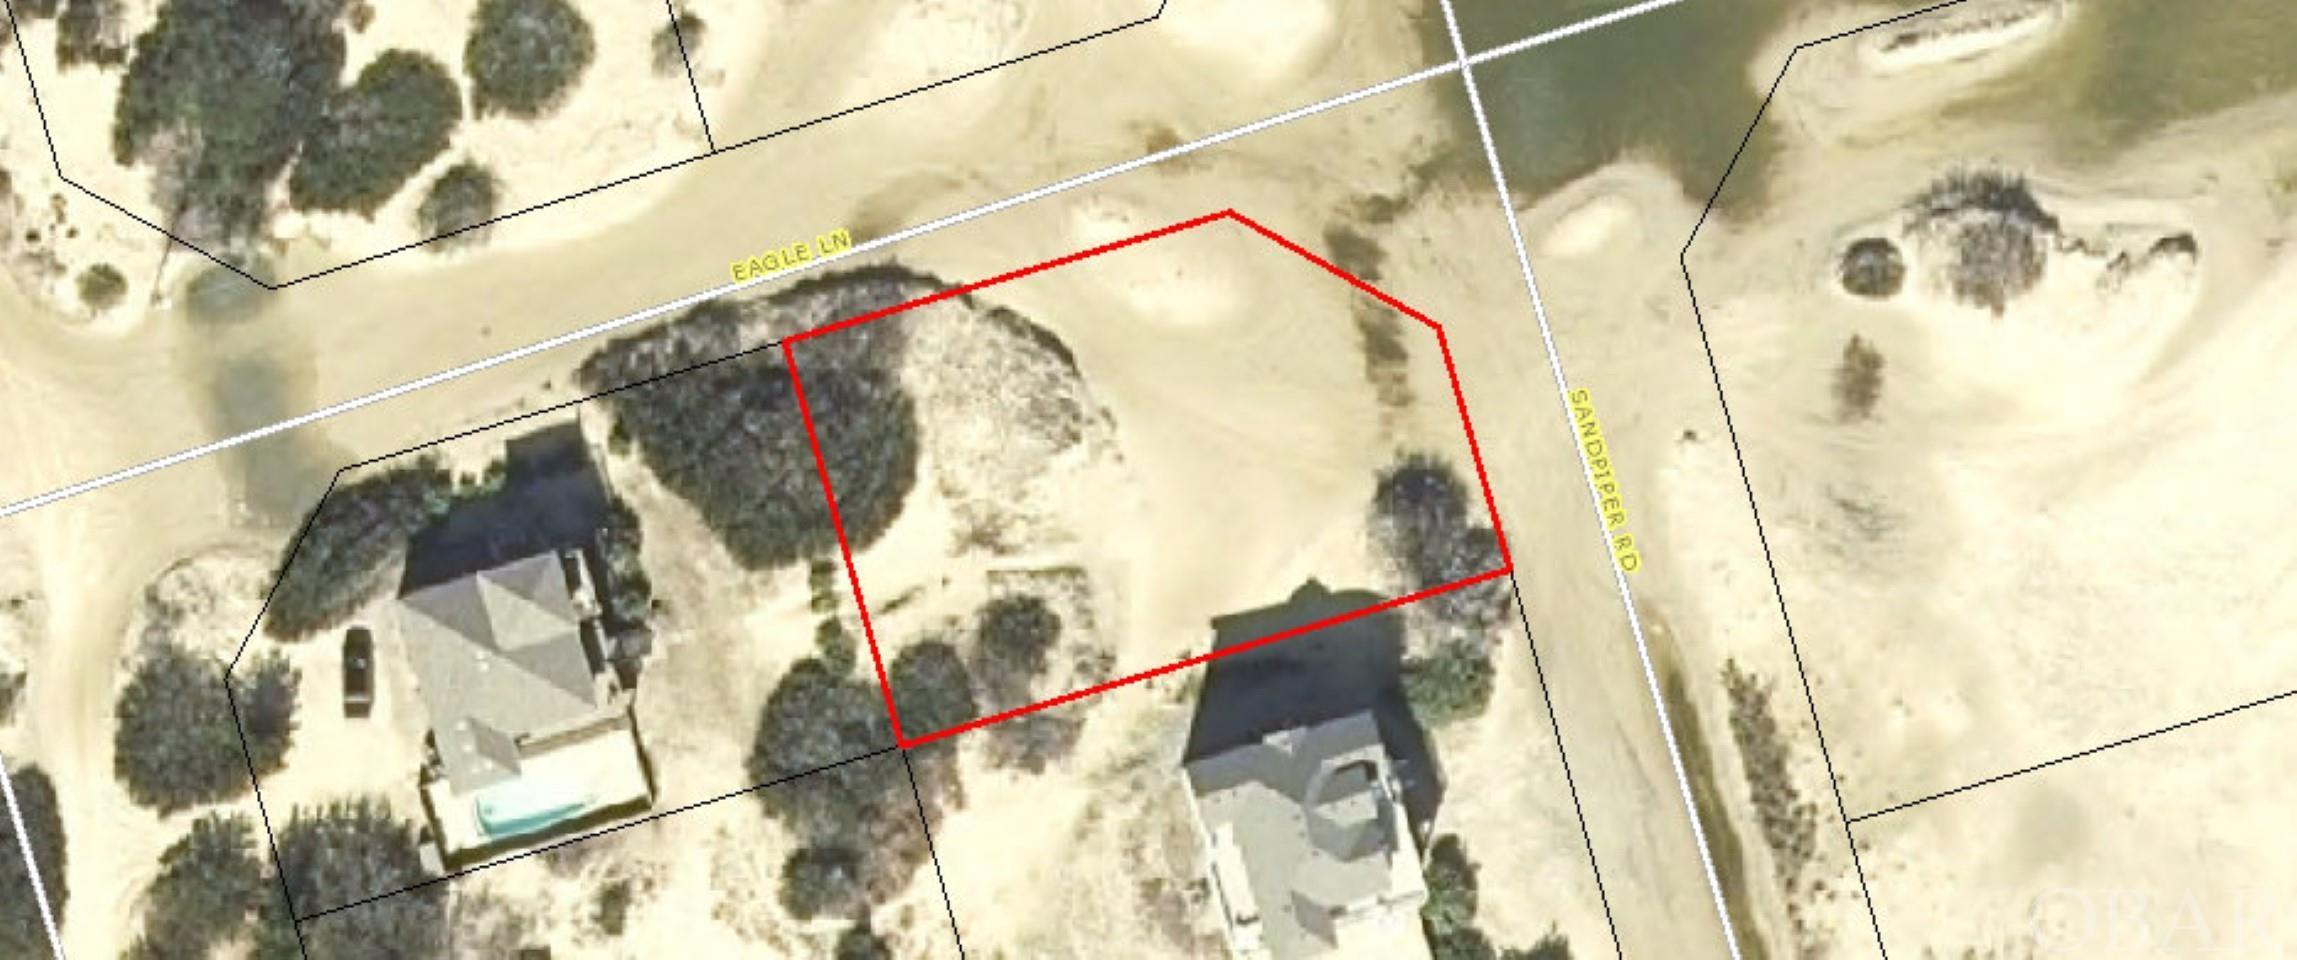 Great corner semi OF lot in the x flood zone.  Lot should have nice ocean views and very convenient beach access.  Perfect location for a second home or vacation rental